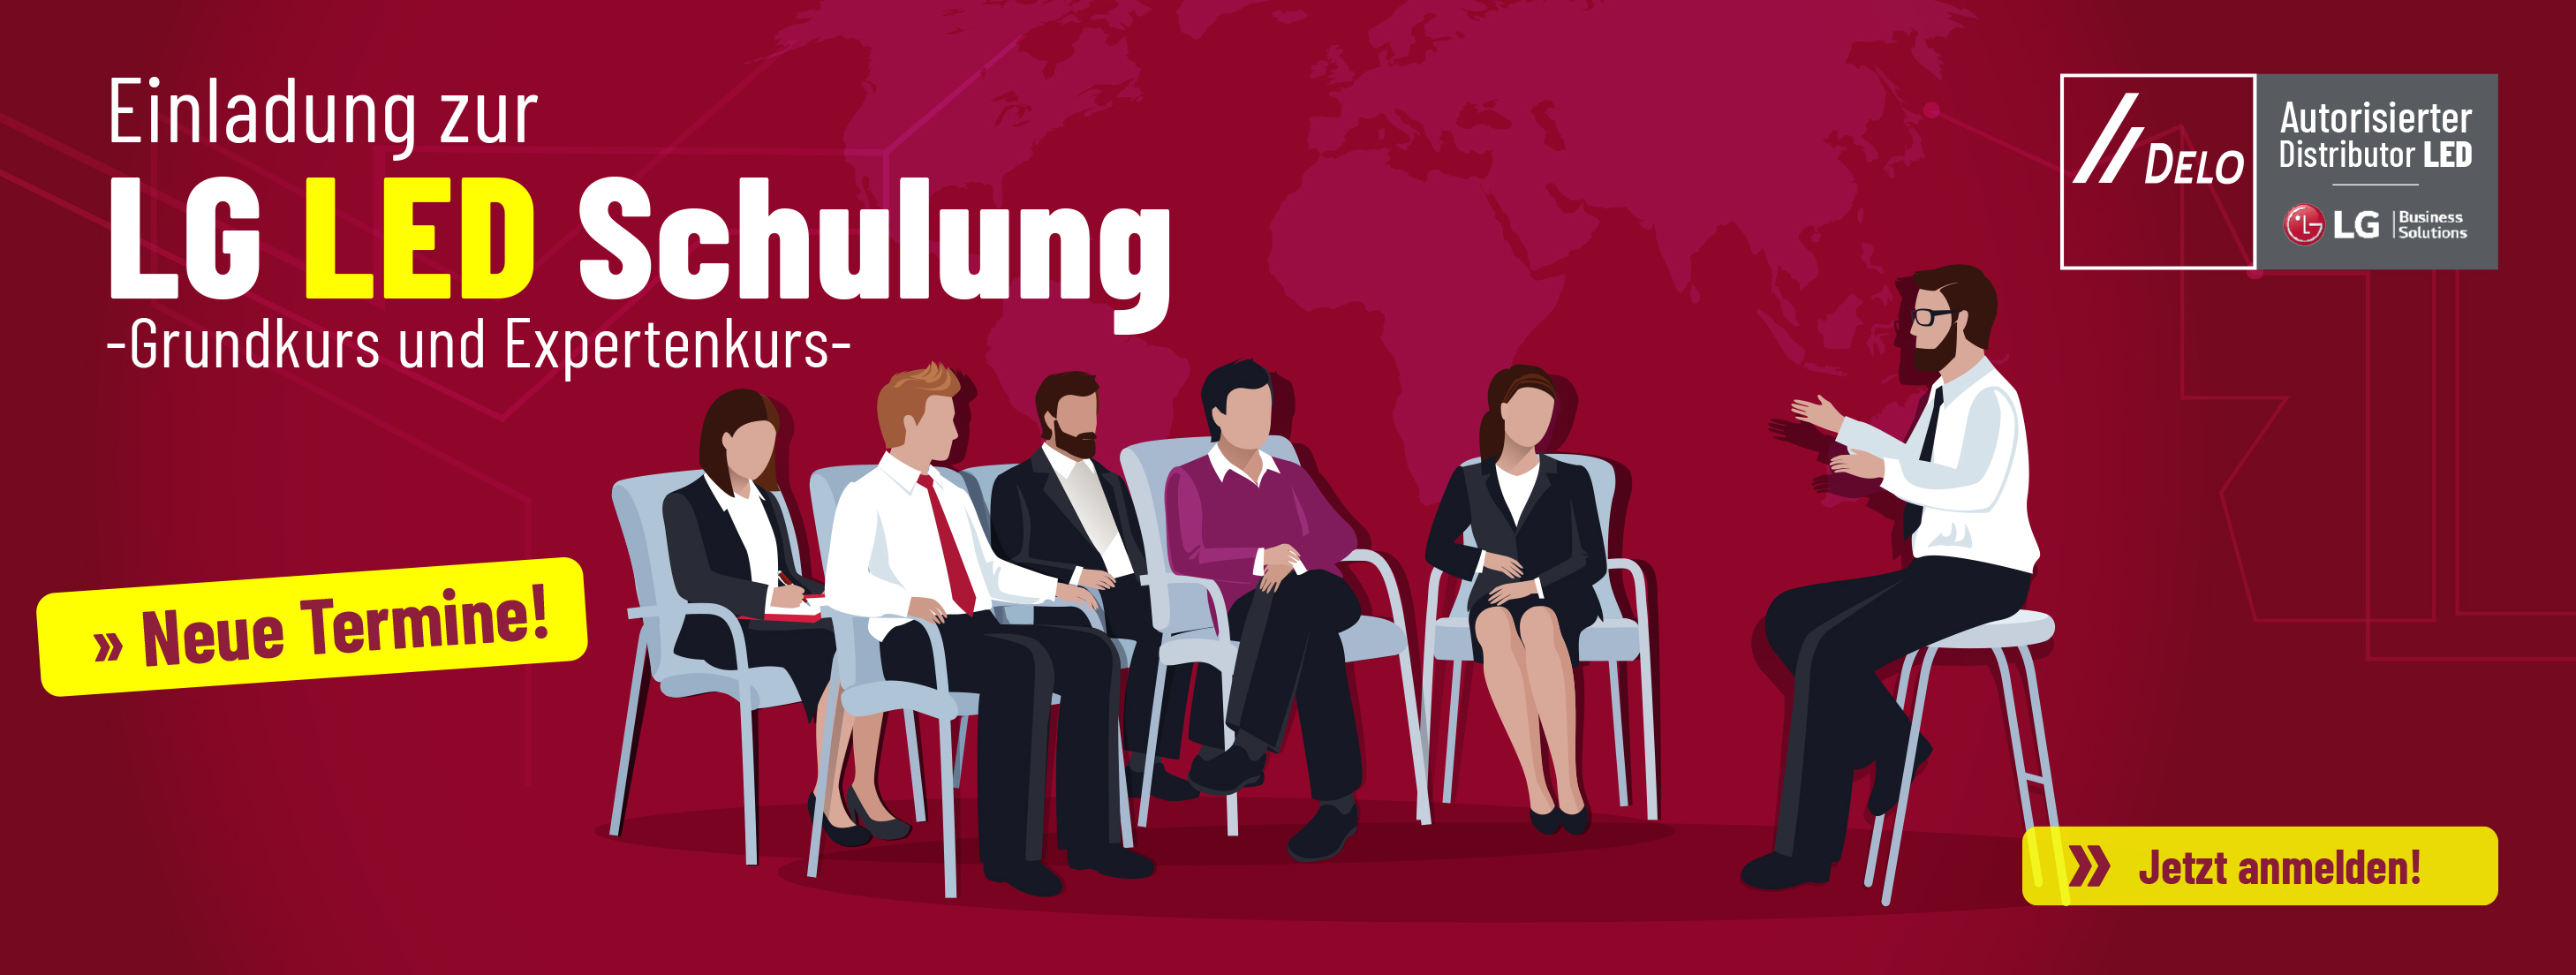 LG_LED_Schulung_Banner